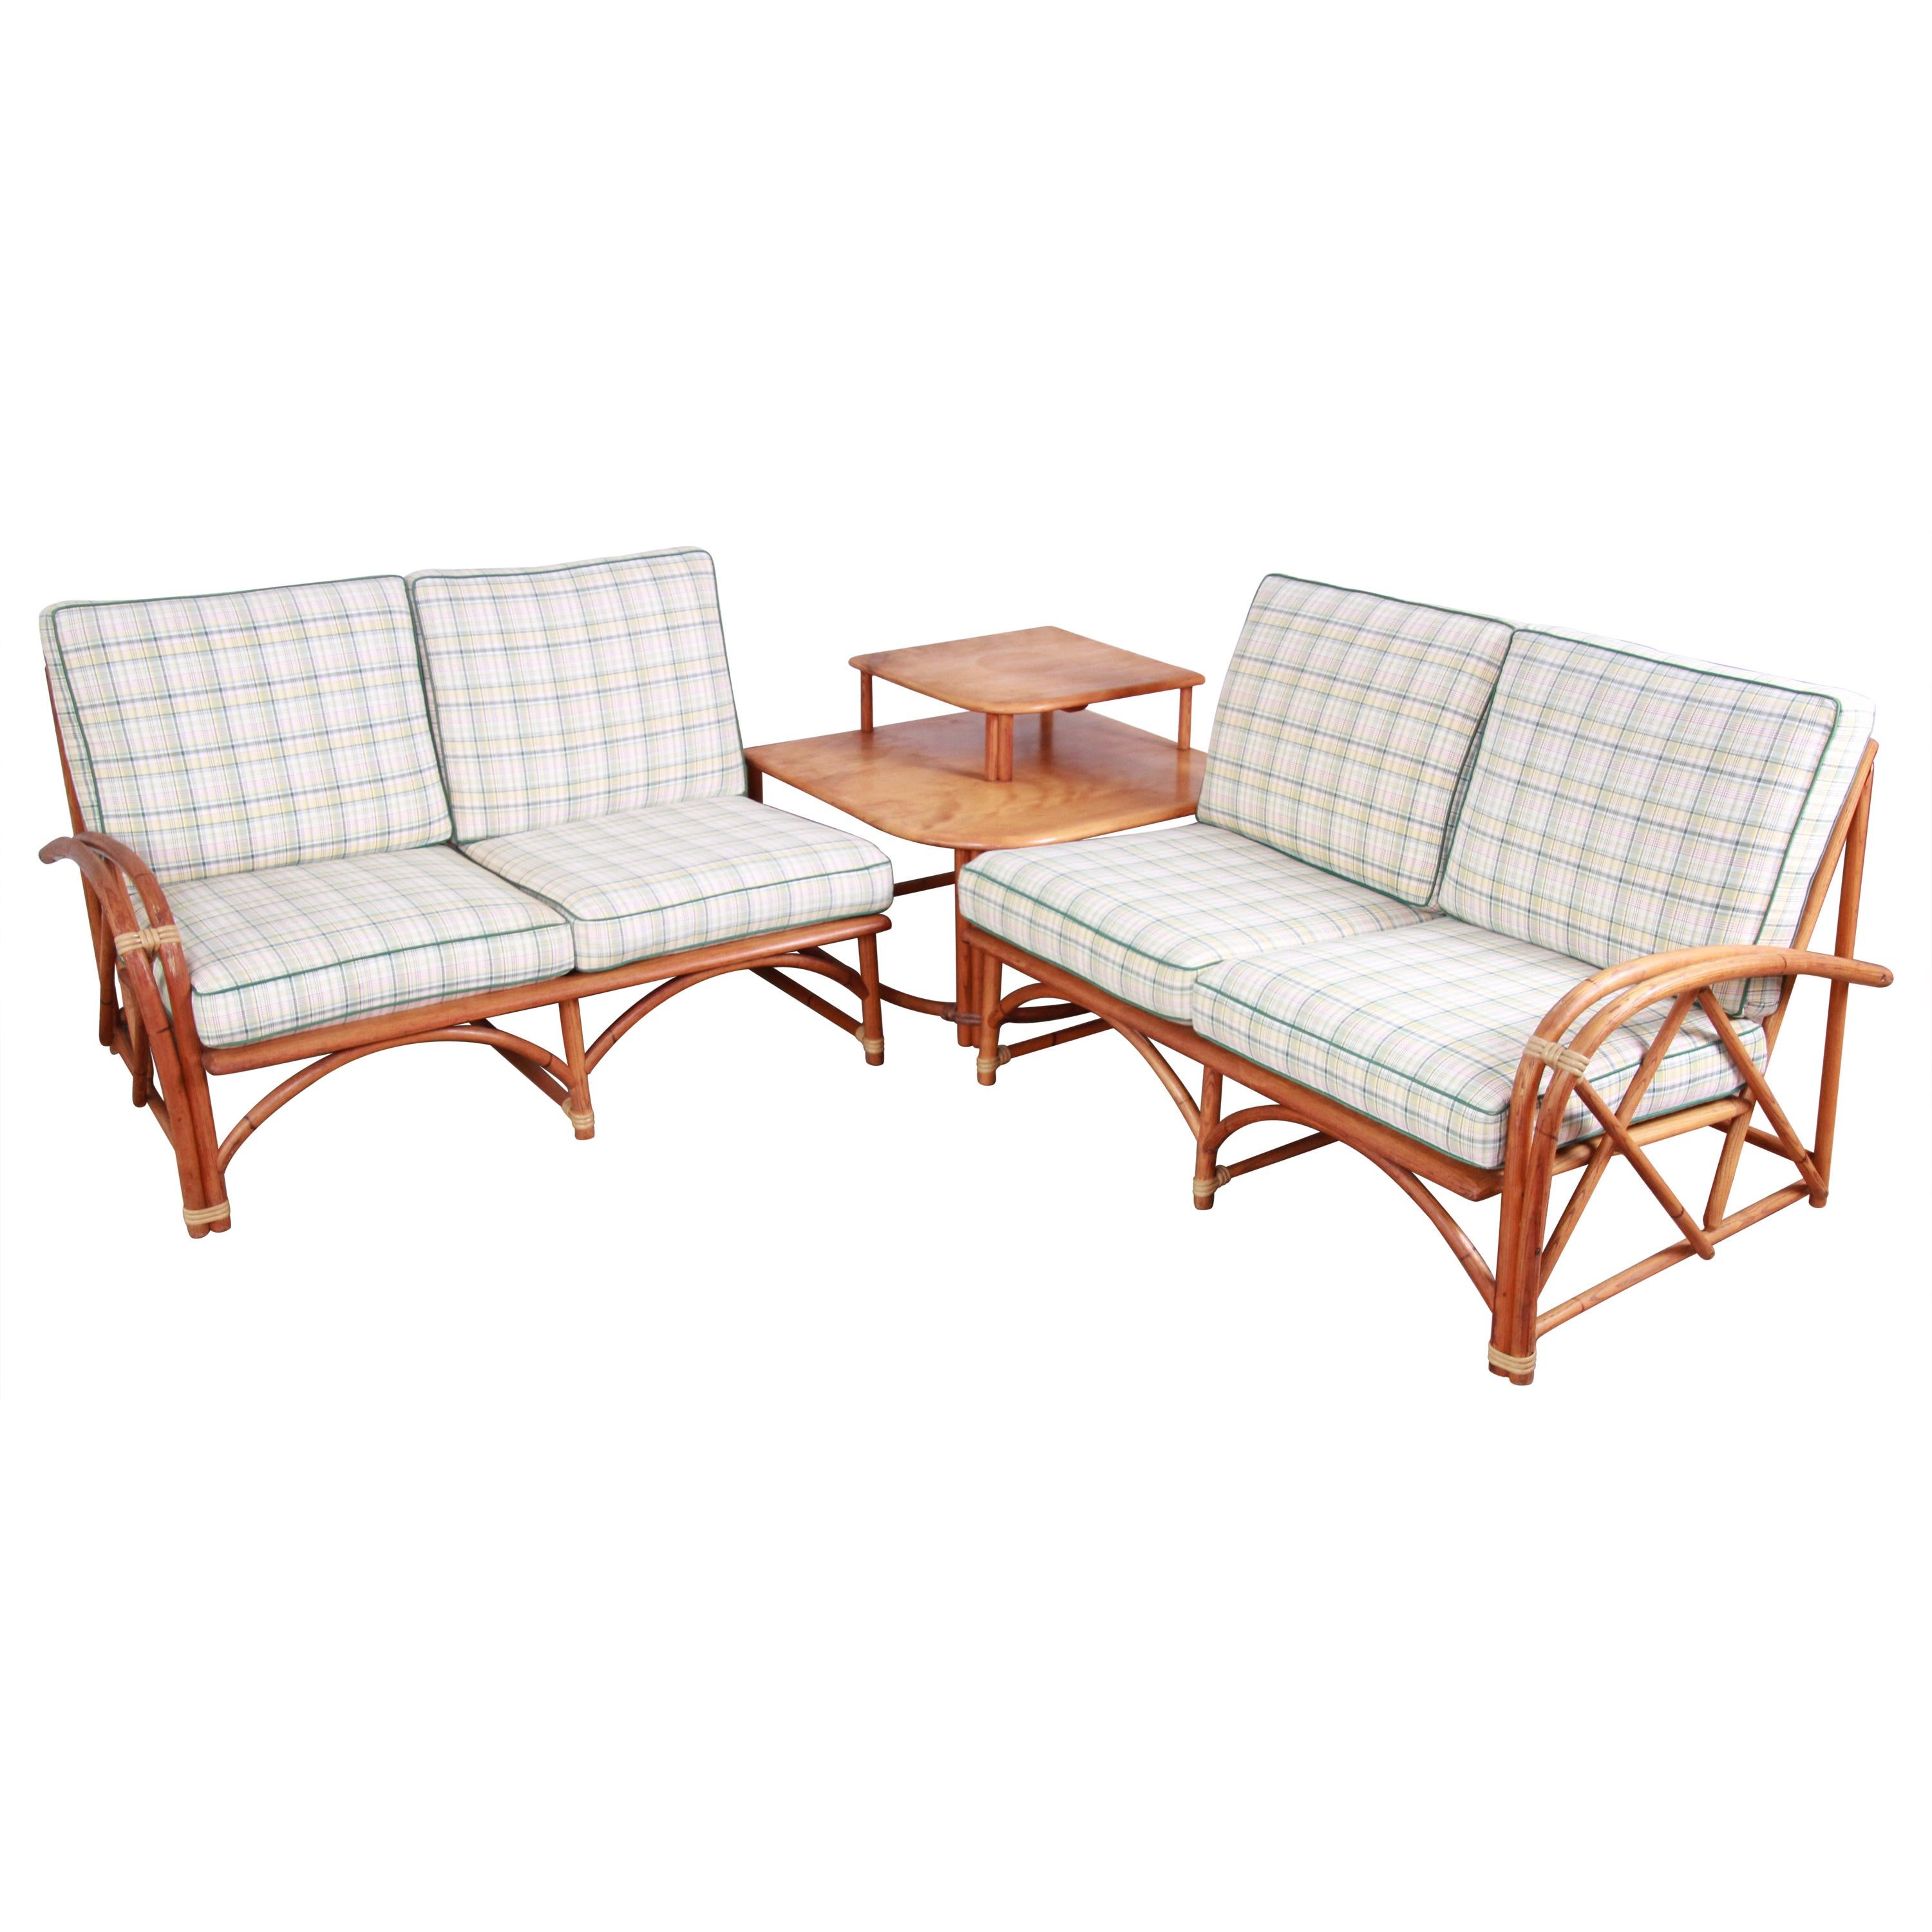 Heywood Wakefield Hollywood Regency Rattan Sectional Sofa and End Table Set